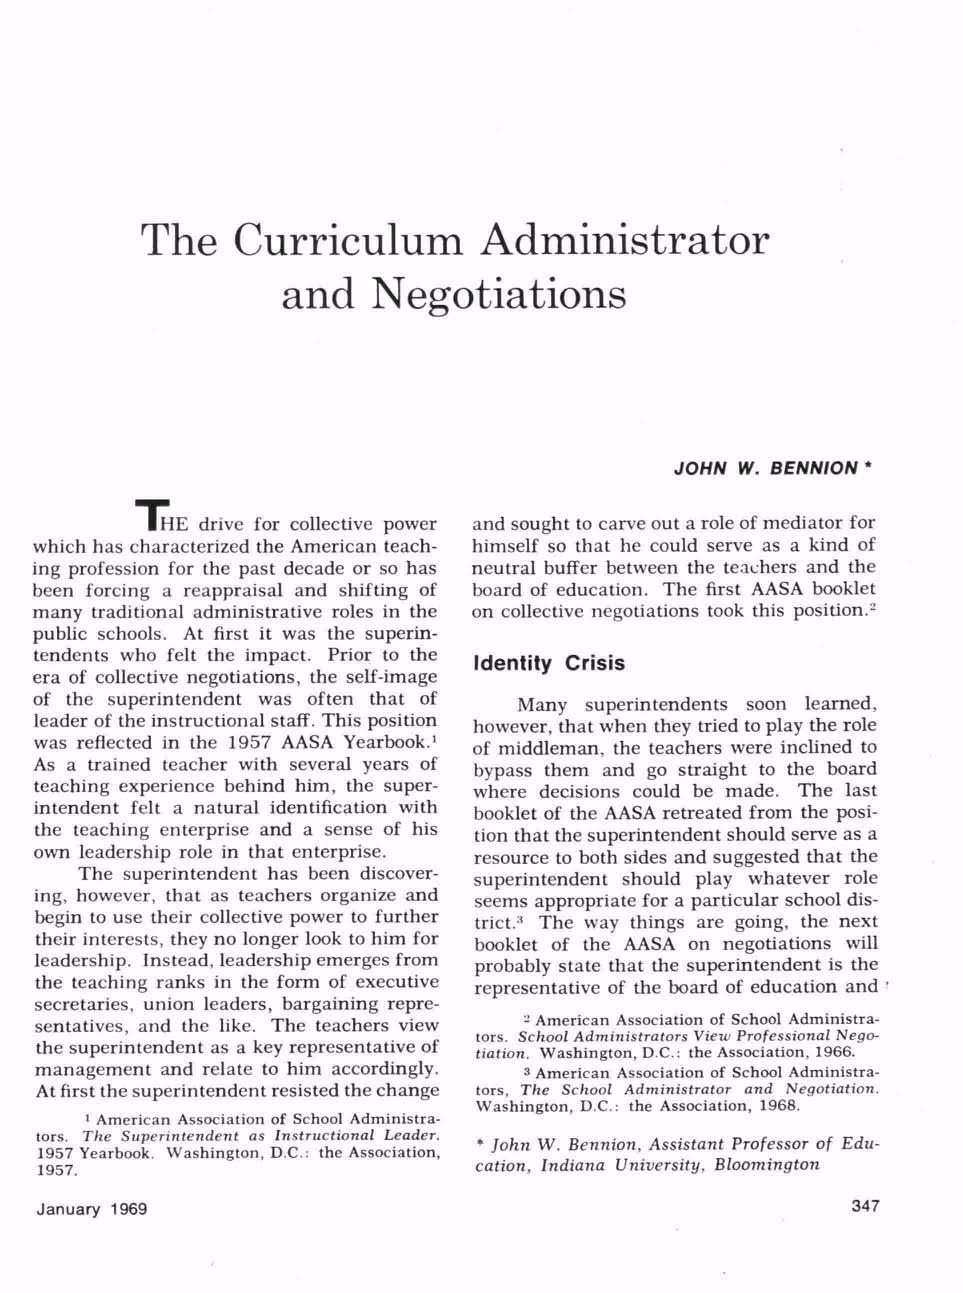 The Curriculum Administrator and Negotiations I HE drive for collective power which has characterized the American teach ing profession for the past decade or so has been forcing a reappraisal and